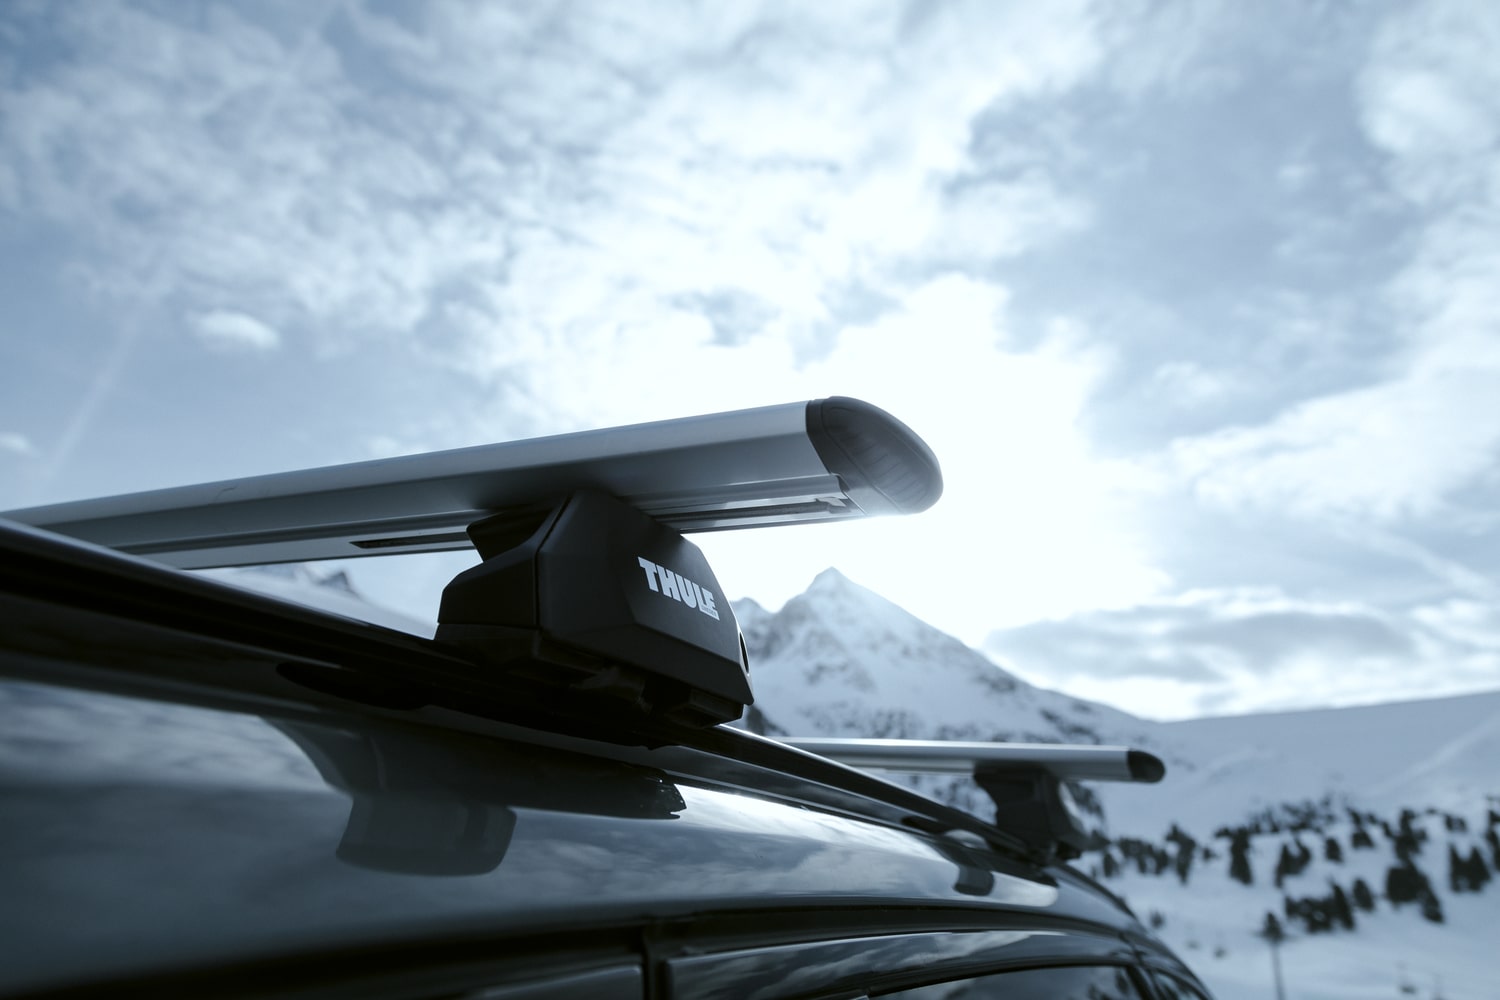 Thule Roof Rack Spare Parts